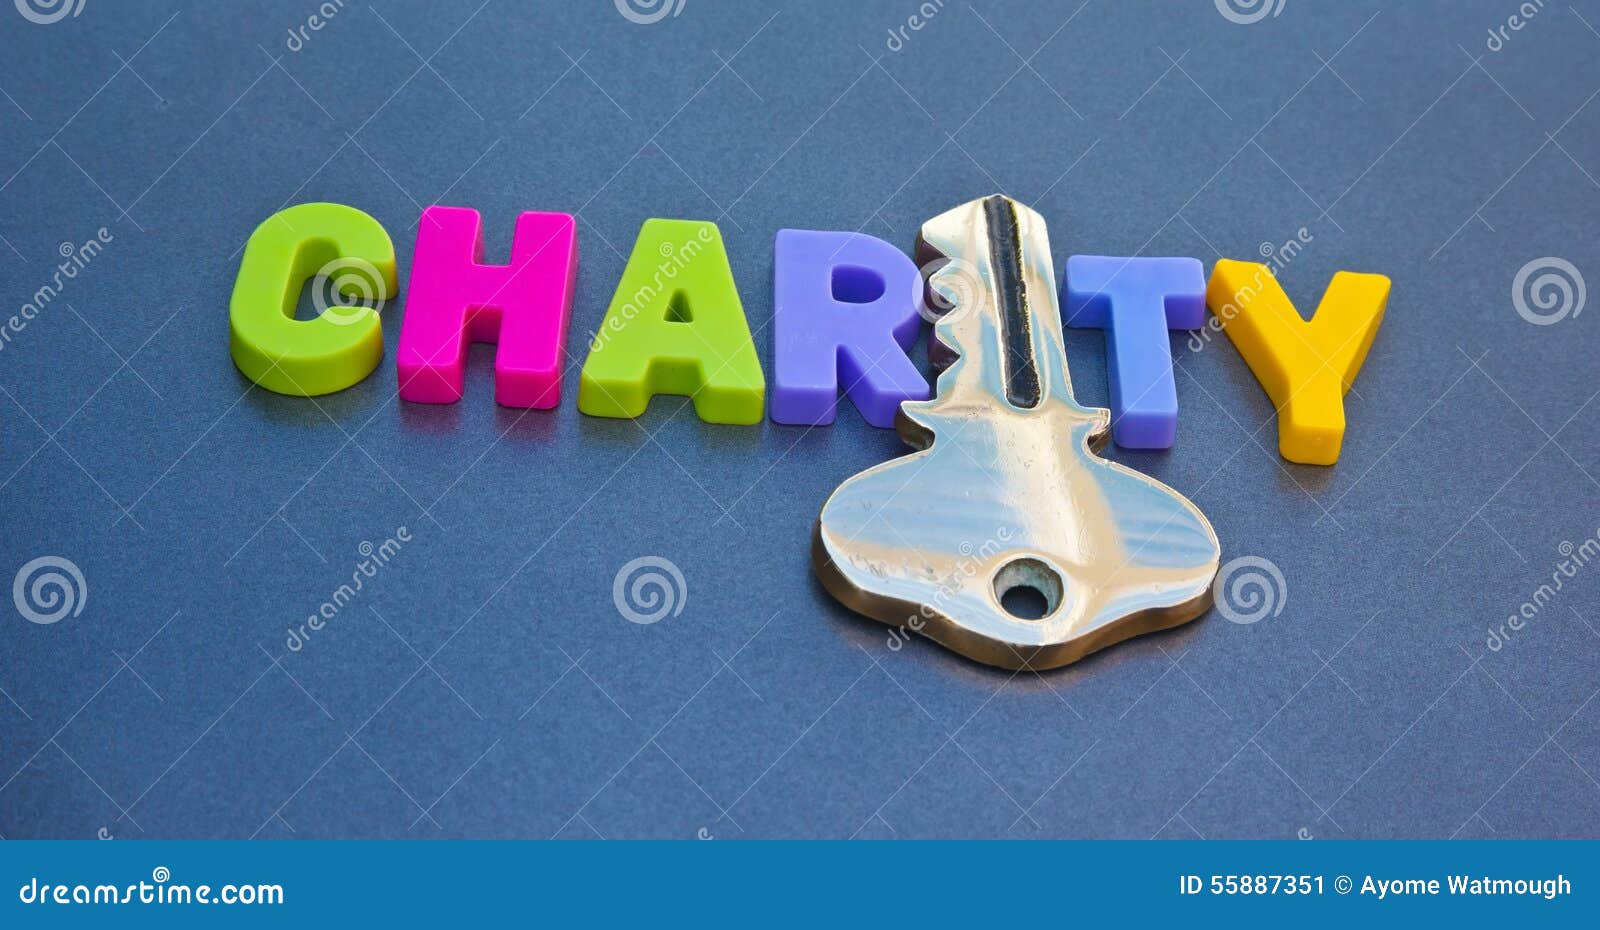 key to charity